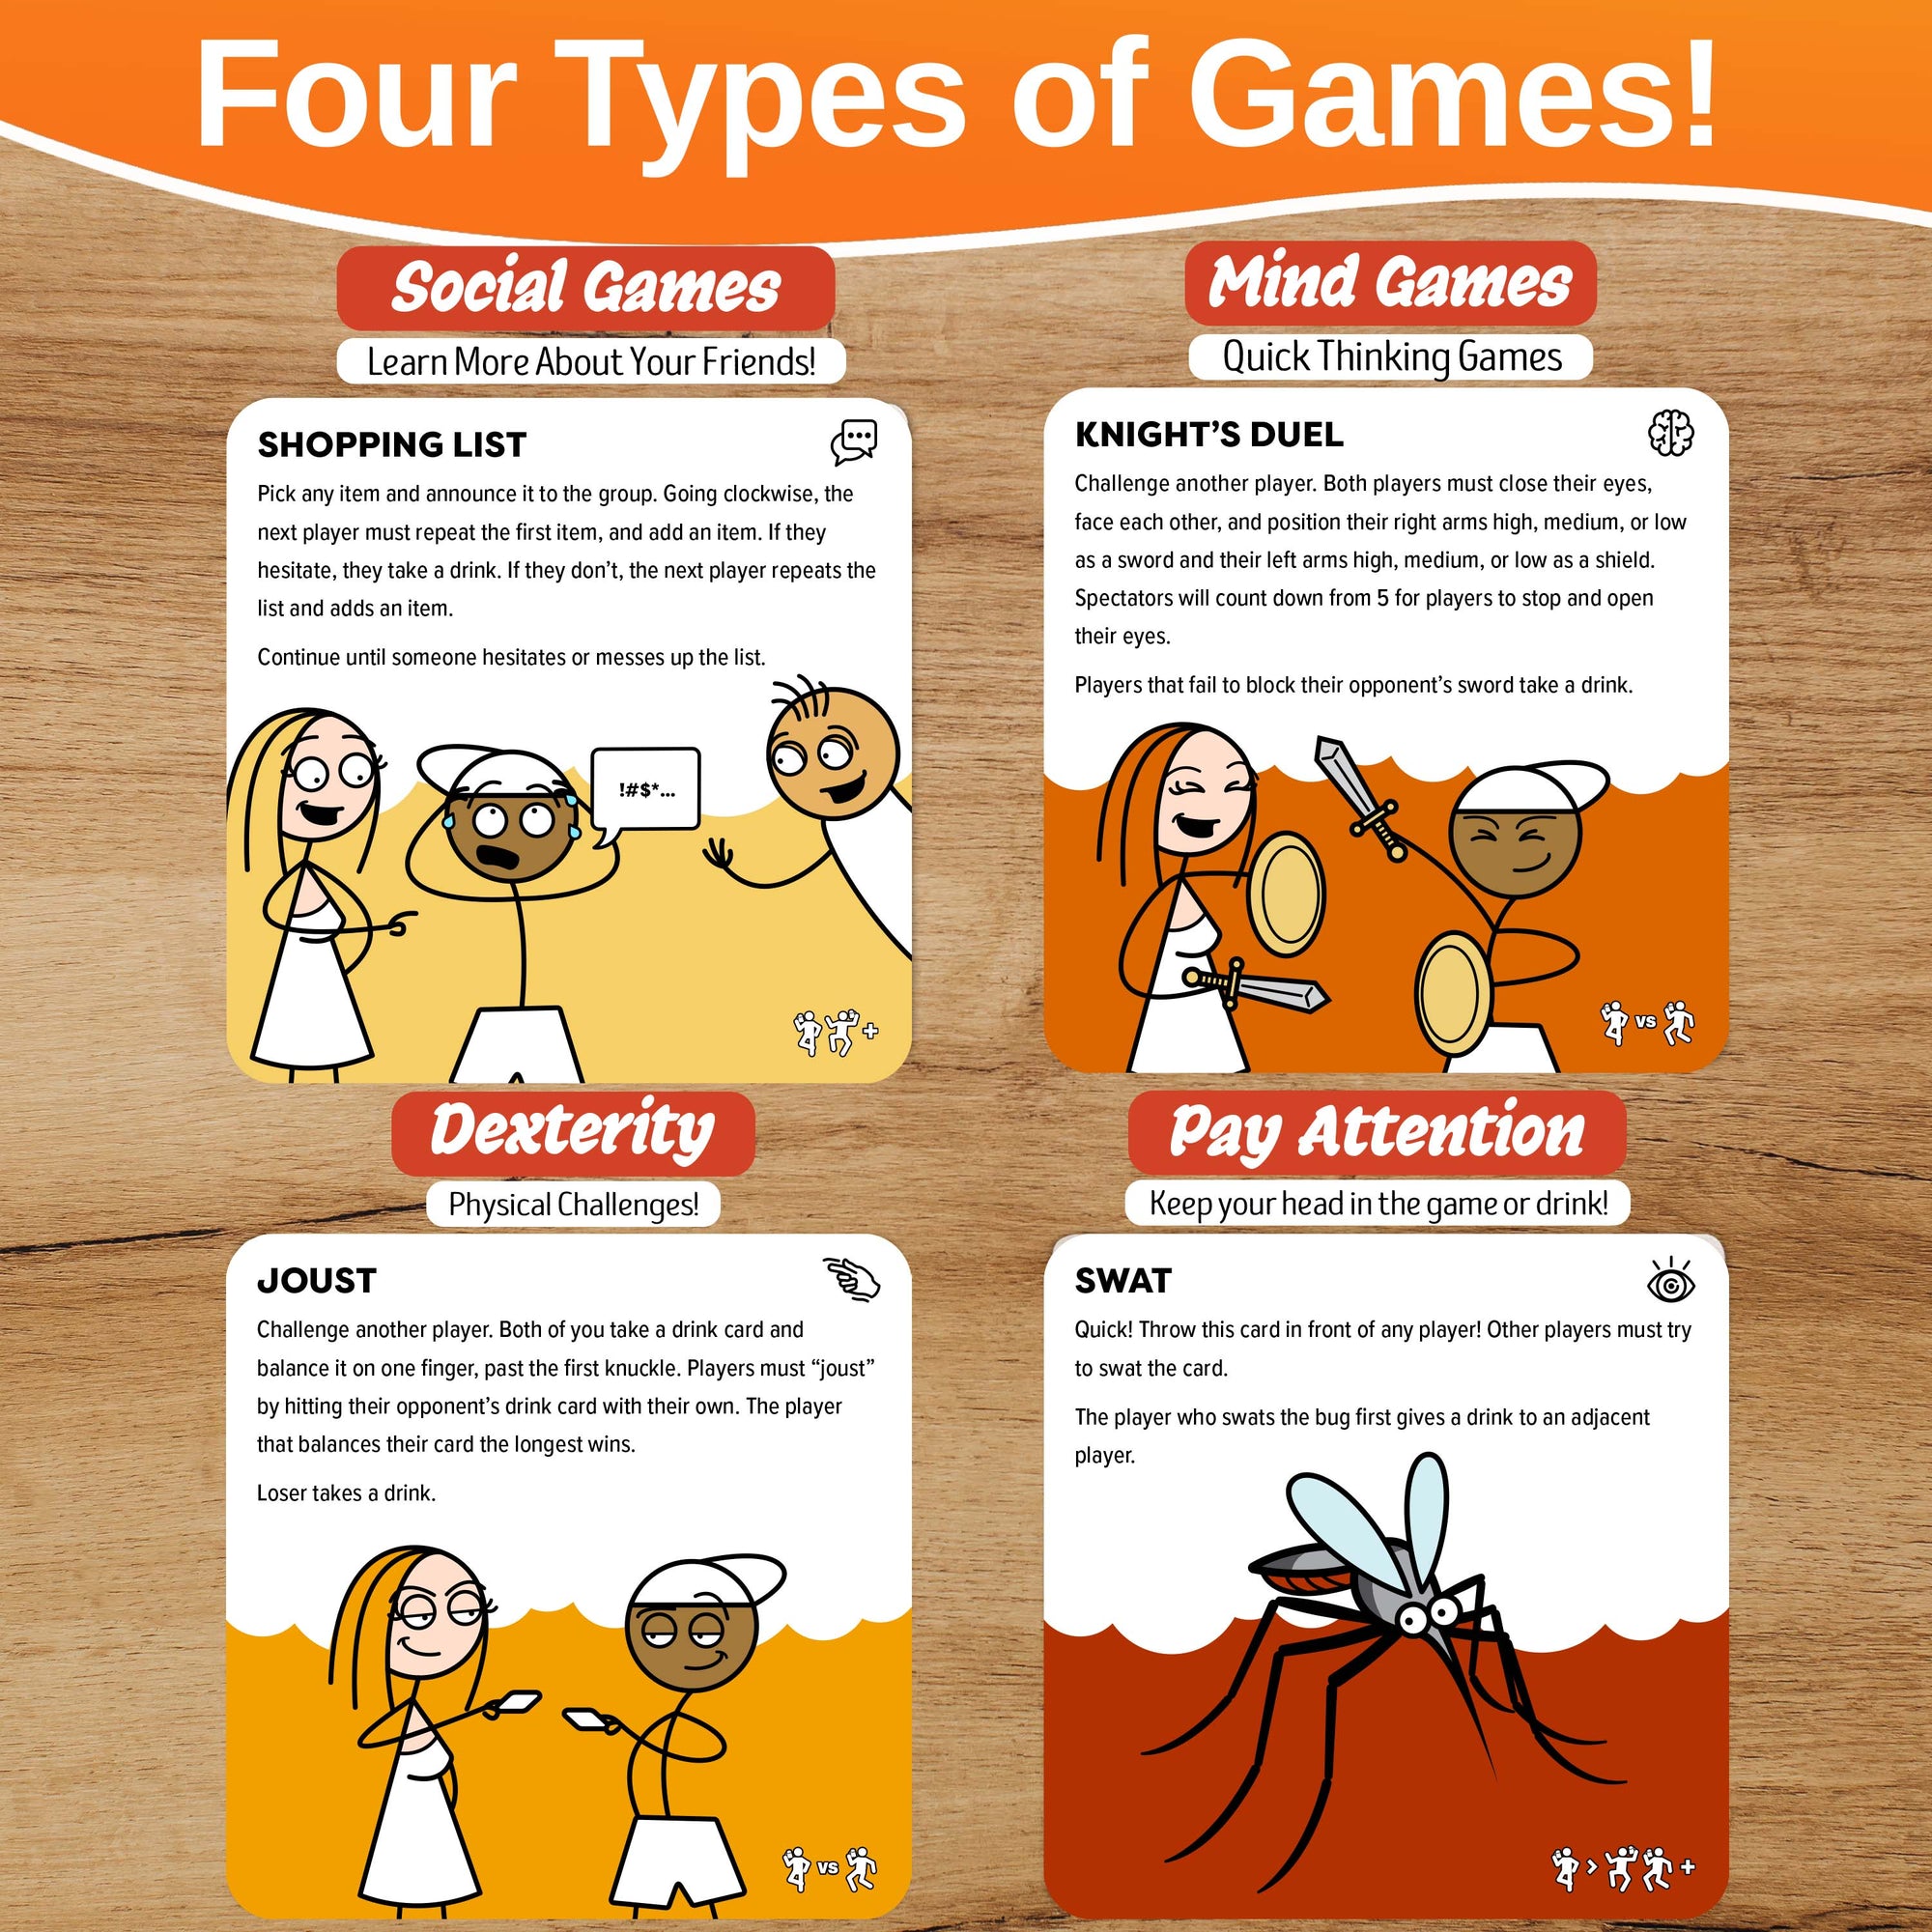 The Drinking Game Game - A Collection of Fun Adult Mini Games for Parties